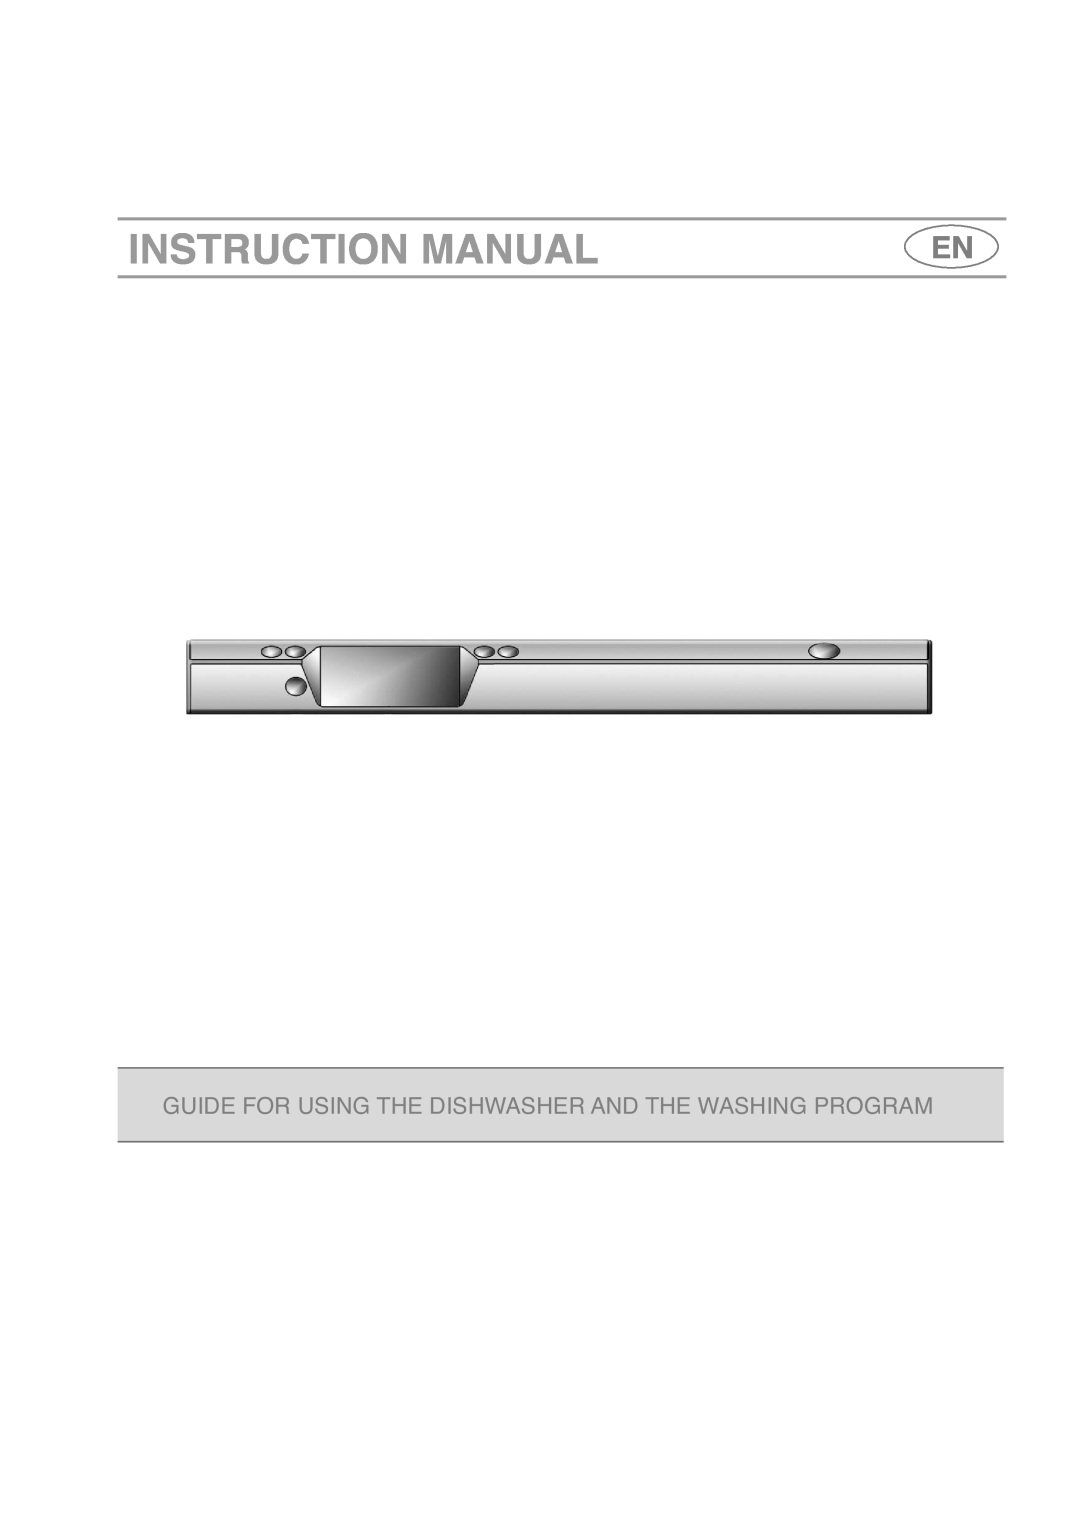 Smeg DI614H instruction manual Instruction Manual, Guide For Using The Dishwasher And The Washing Program 